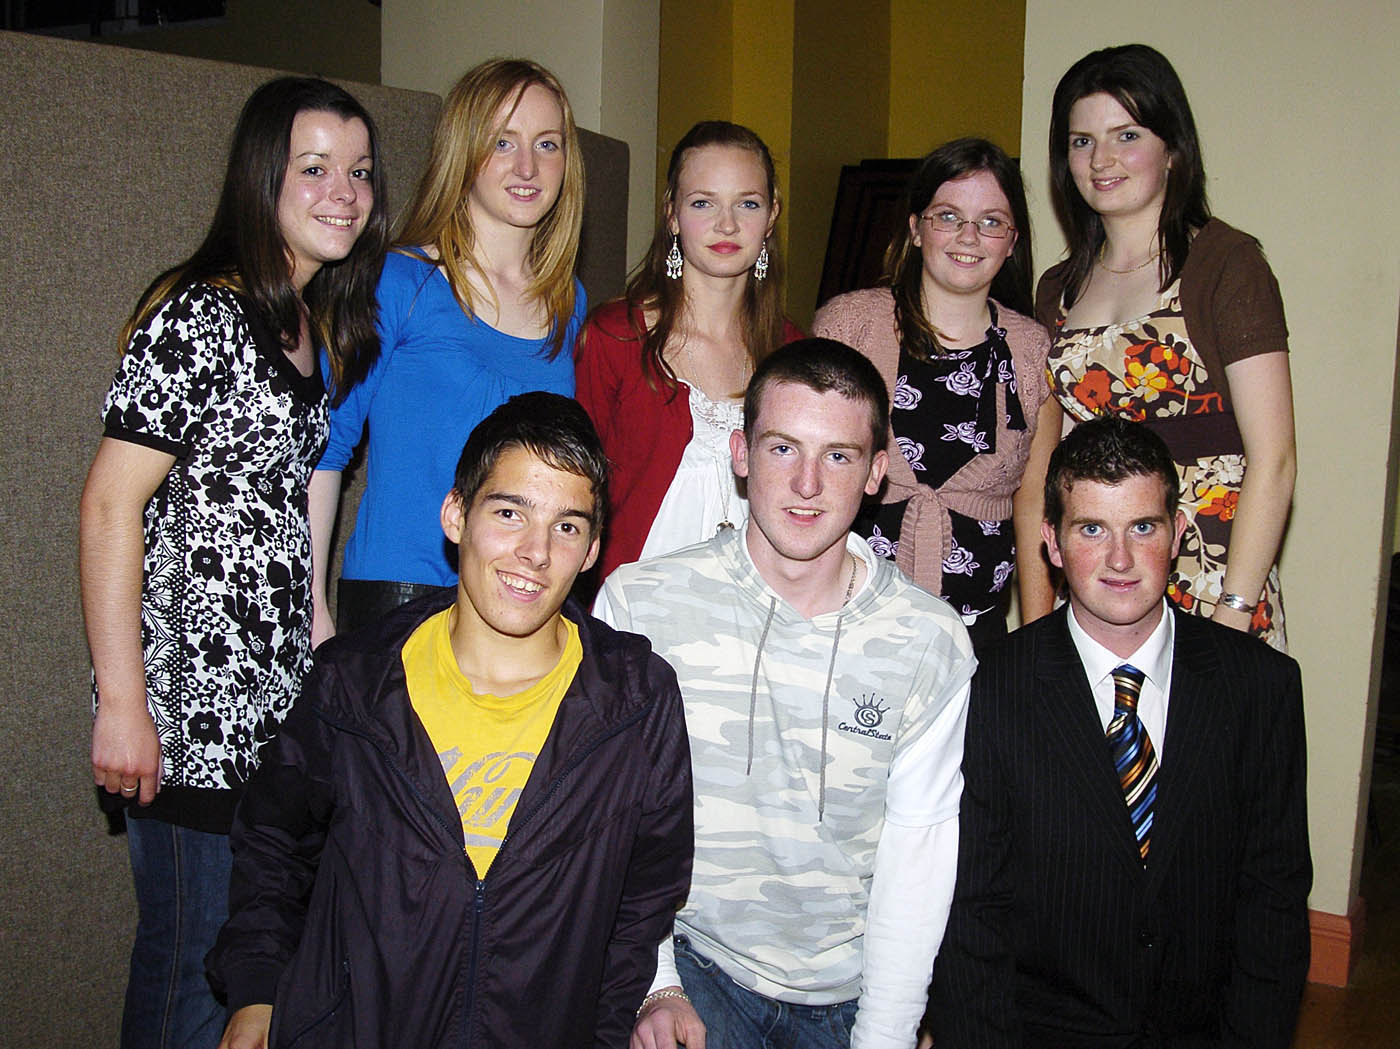 Pictured in the Resource centre in Balla at a Fashion Show organised by Manulla Football Club Youth Council to raise funds for Manulla Football Club. Outfits for the night were supplied by Next Step, Elverys, Adams at Shaws, Beverley Hills and Padraic McHales.  Members of the Youth Council, Front L-R: Cillian McGlade, Callum Murray, Colin McDonald. Back l-R: Catherine Giblin, Louise Roughneen, Niamh Lavelle, Aileen Durkan, Natalie Bourke. Photo  Ken Wright Photography 2007